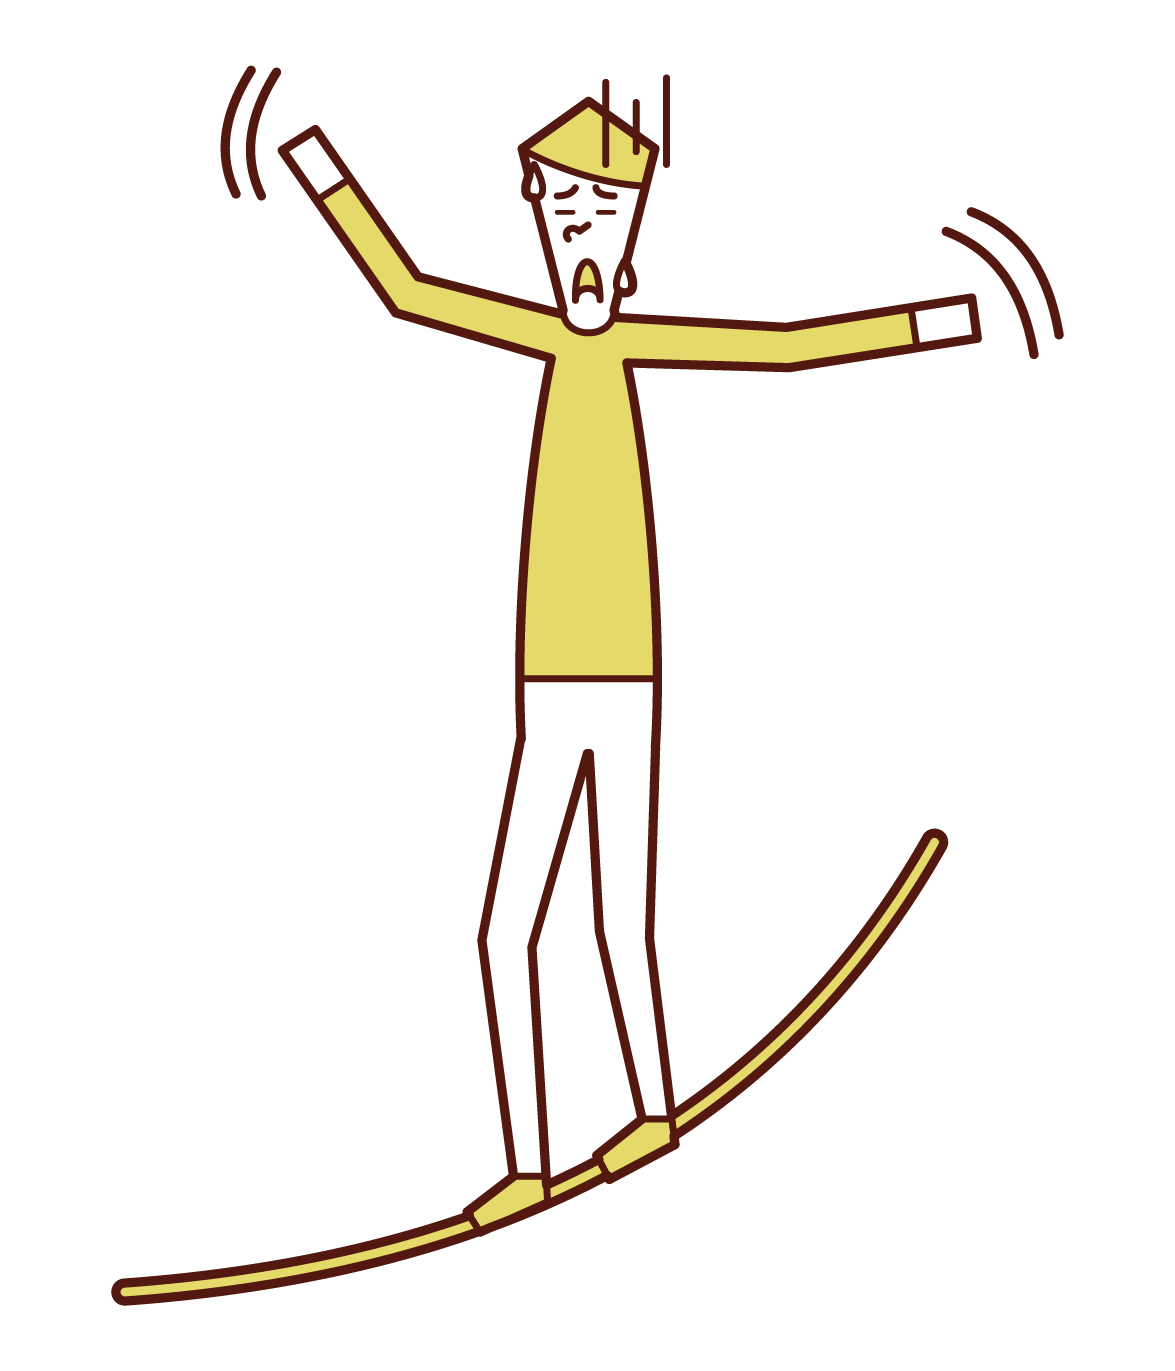 Illustration of a man walking a tightrope